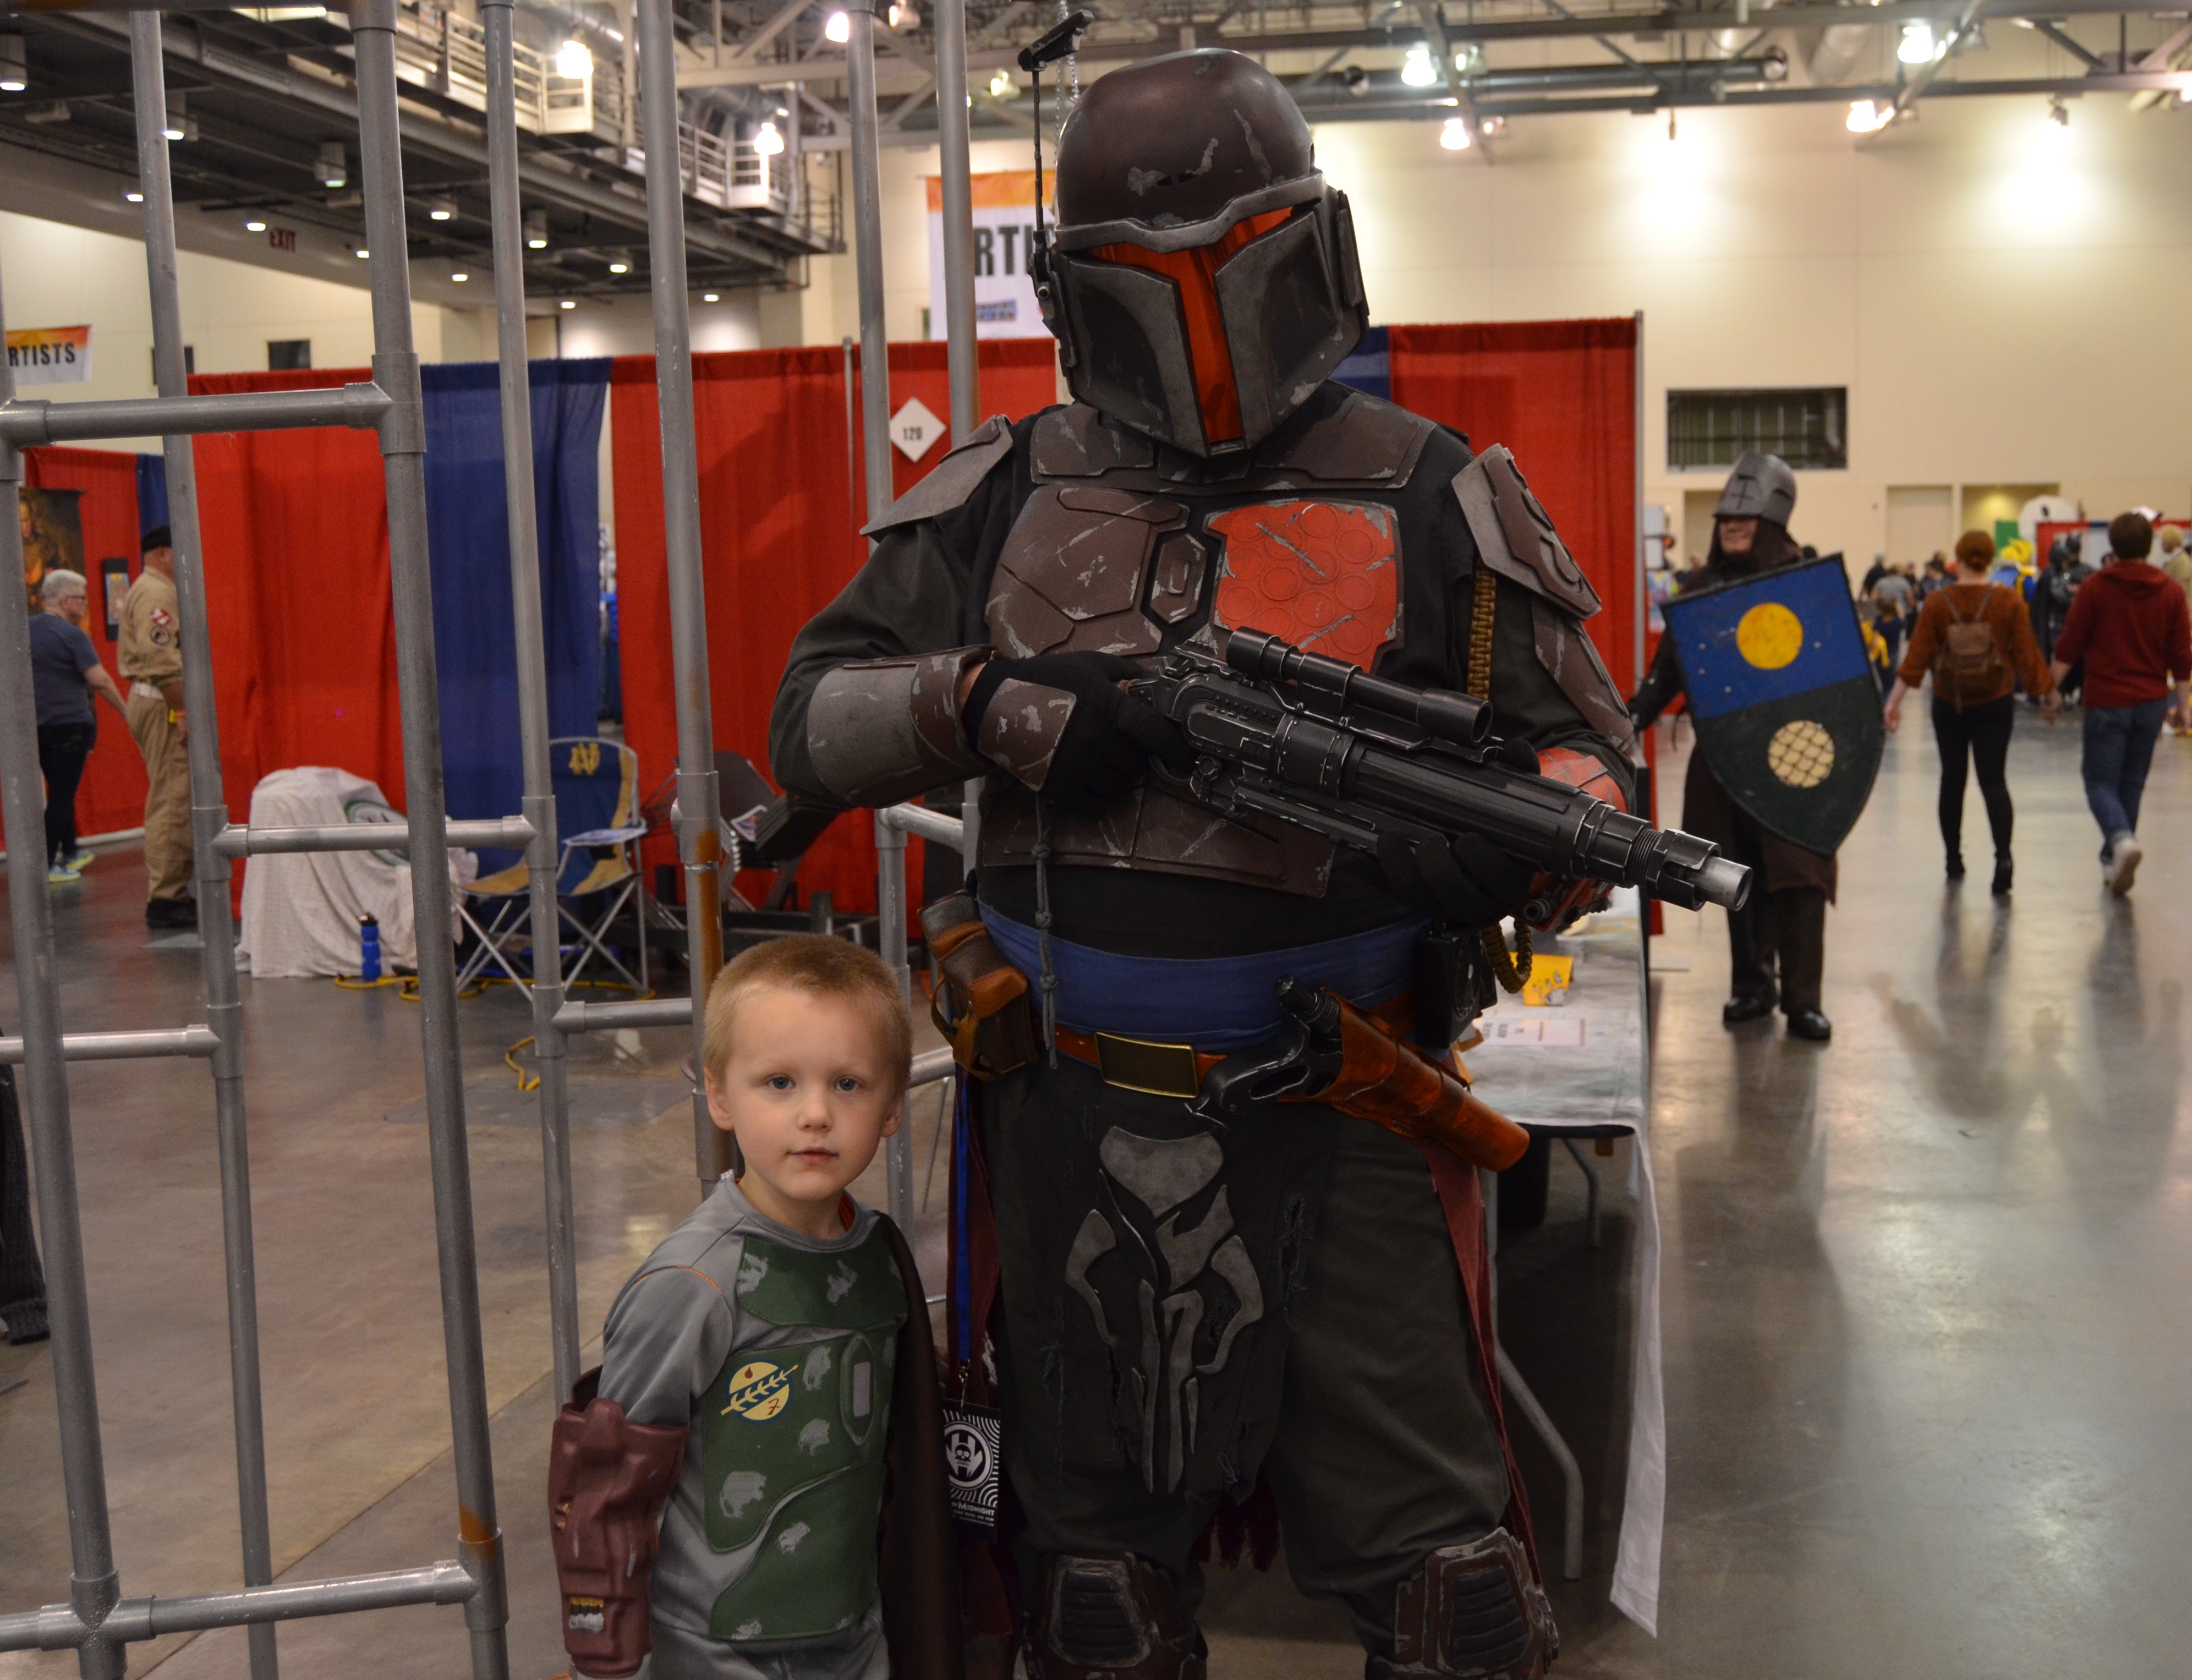 The Mandalorian Mercs also brought their cosplay group to the event